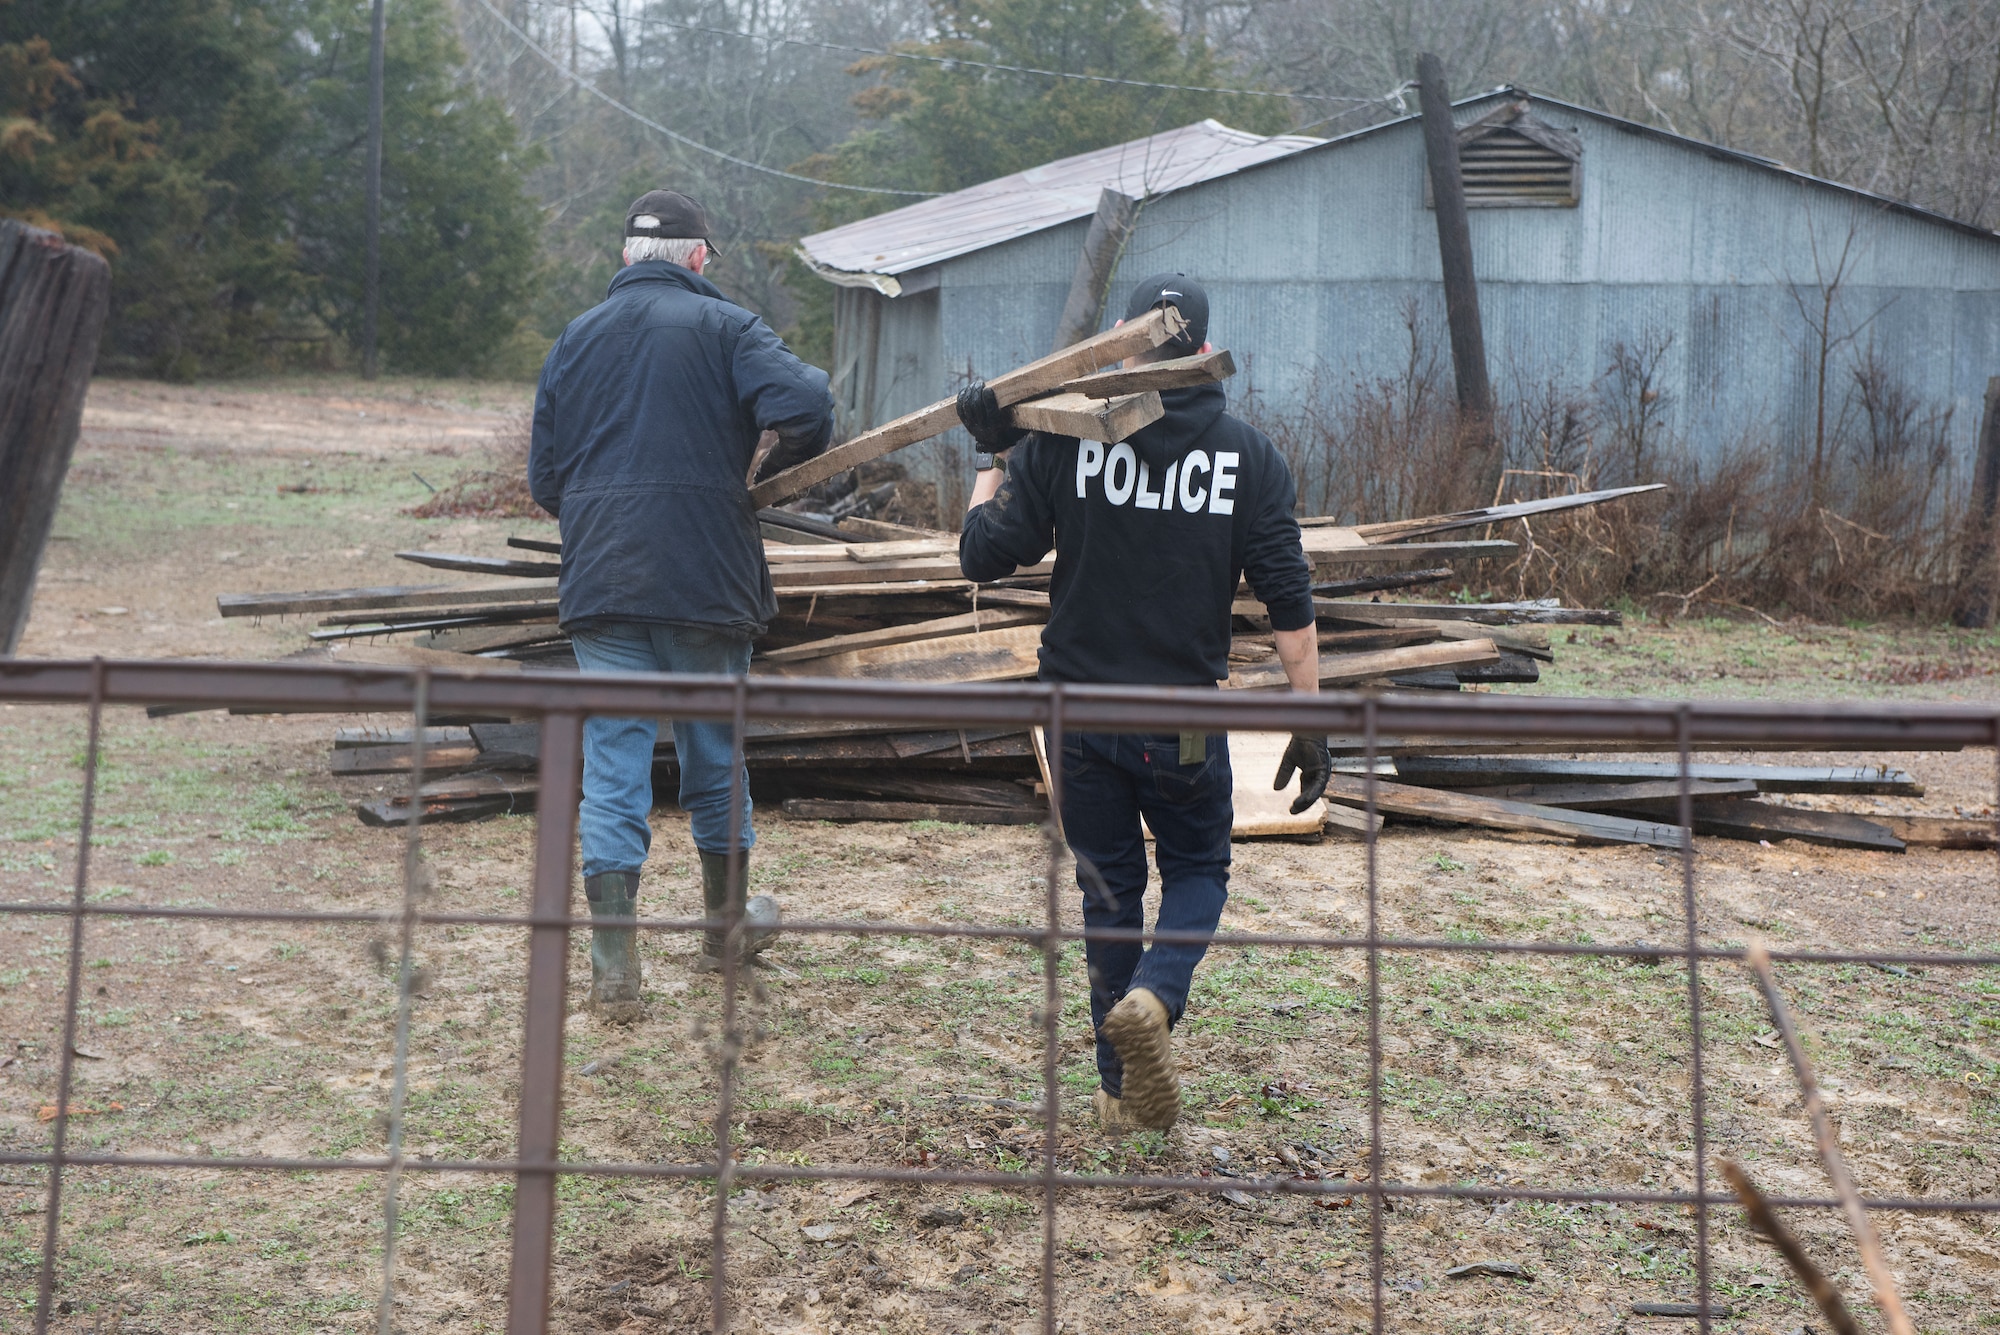 Airman 1st Class Miguel Tapia and Vietnam War veteran Todd Conner move scrap wood to a pile on March 20, 2019, at Conner's farm in Knob Noster, Missouri.